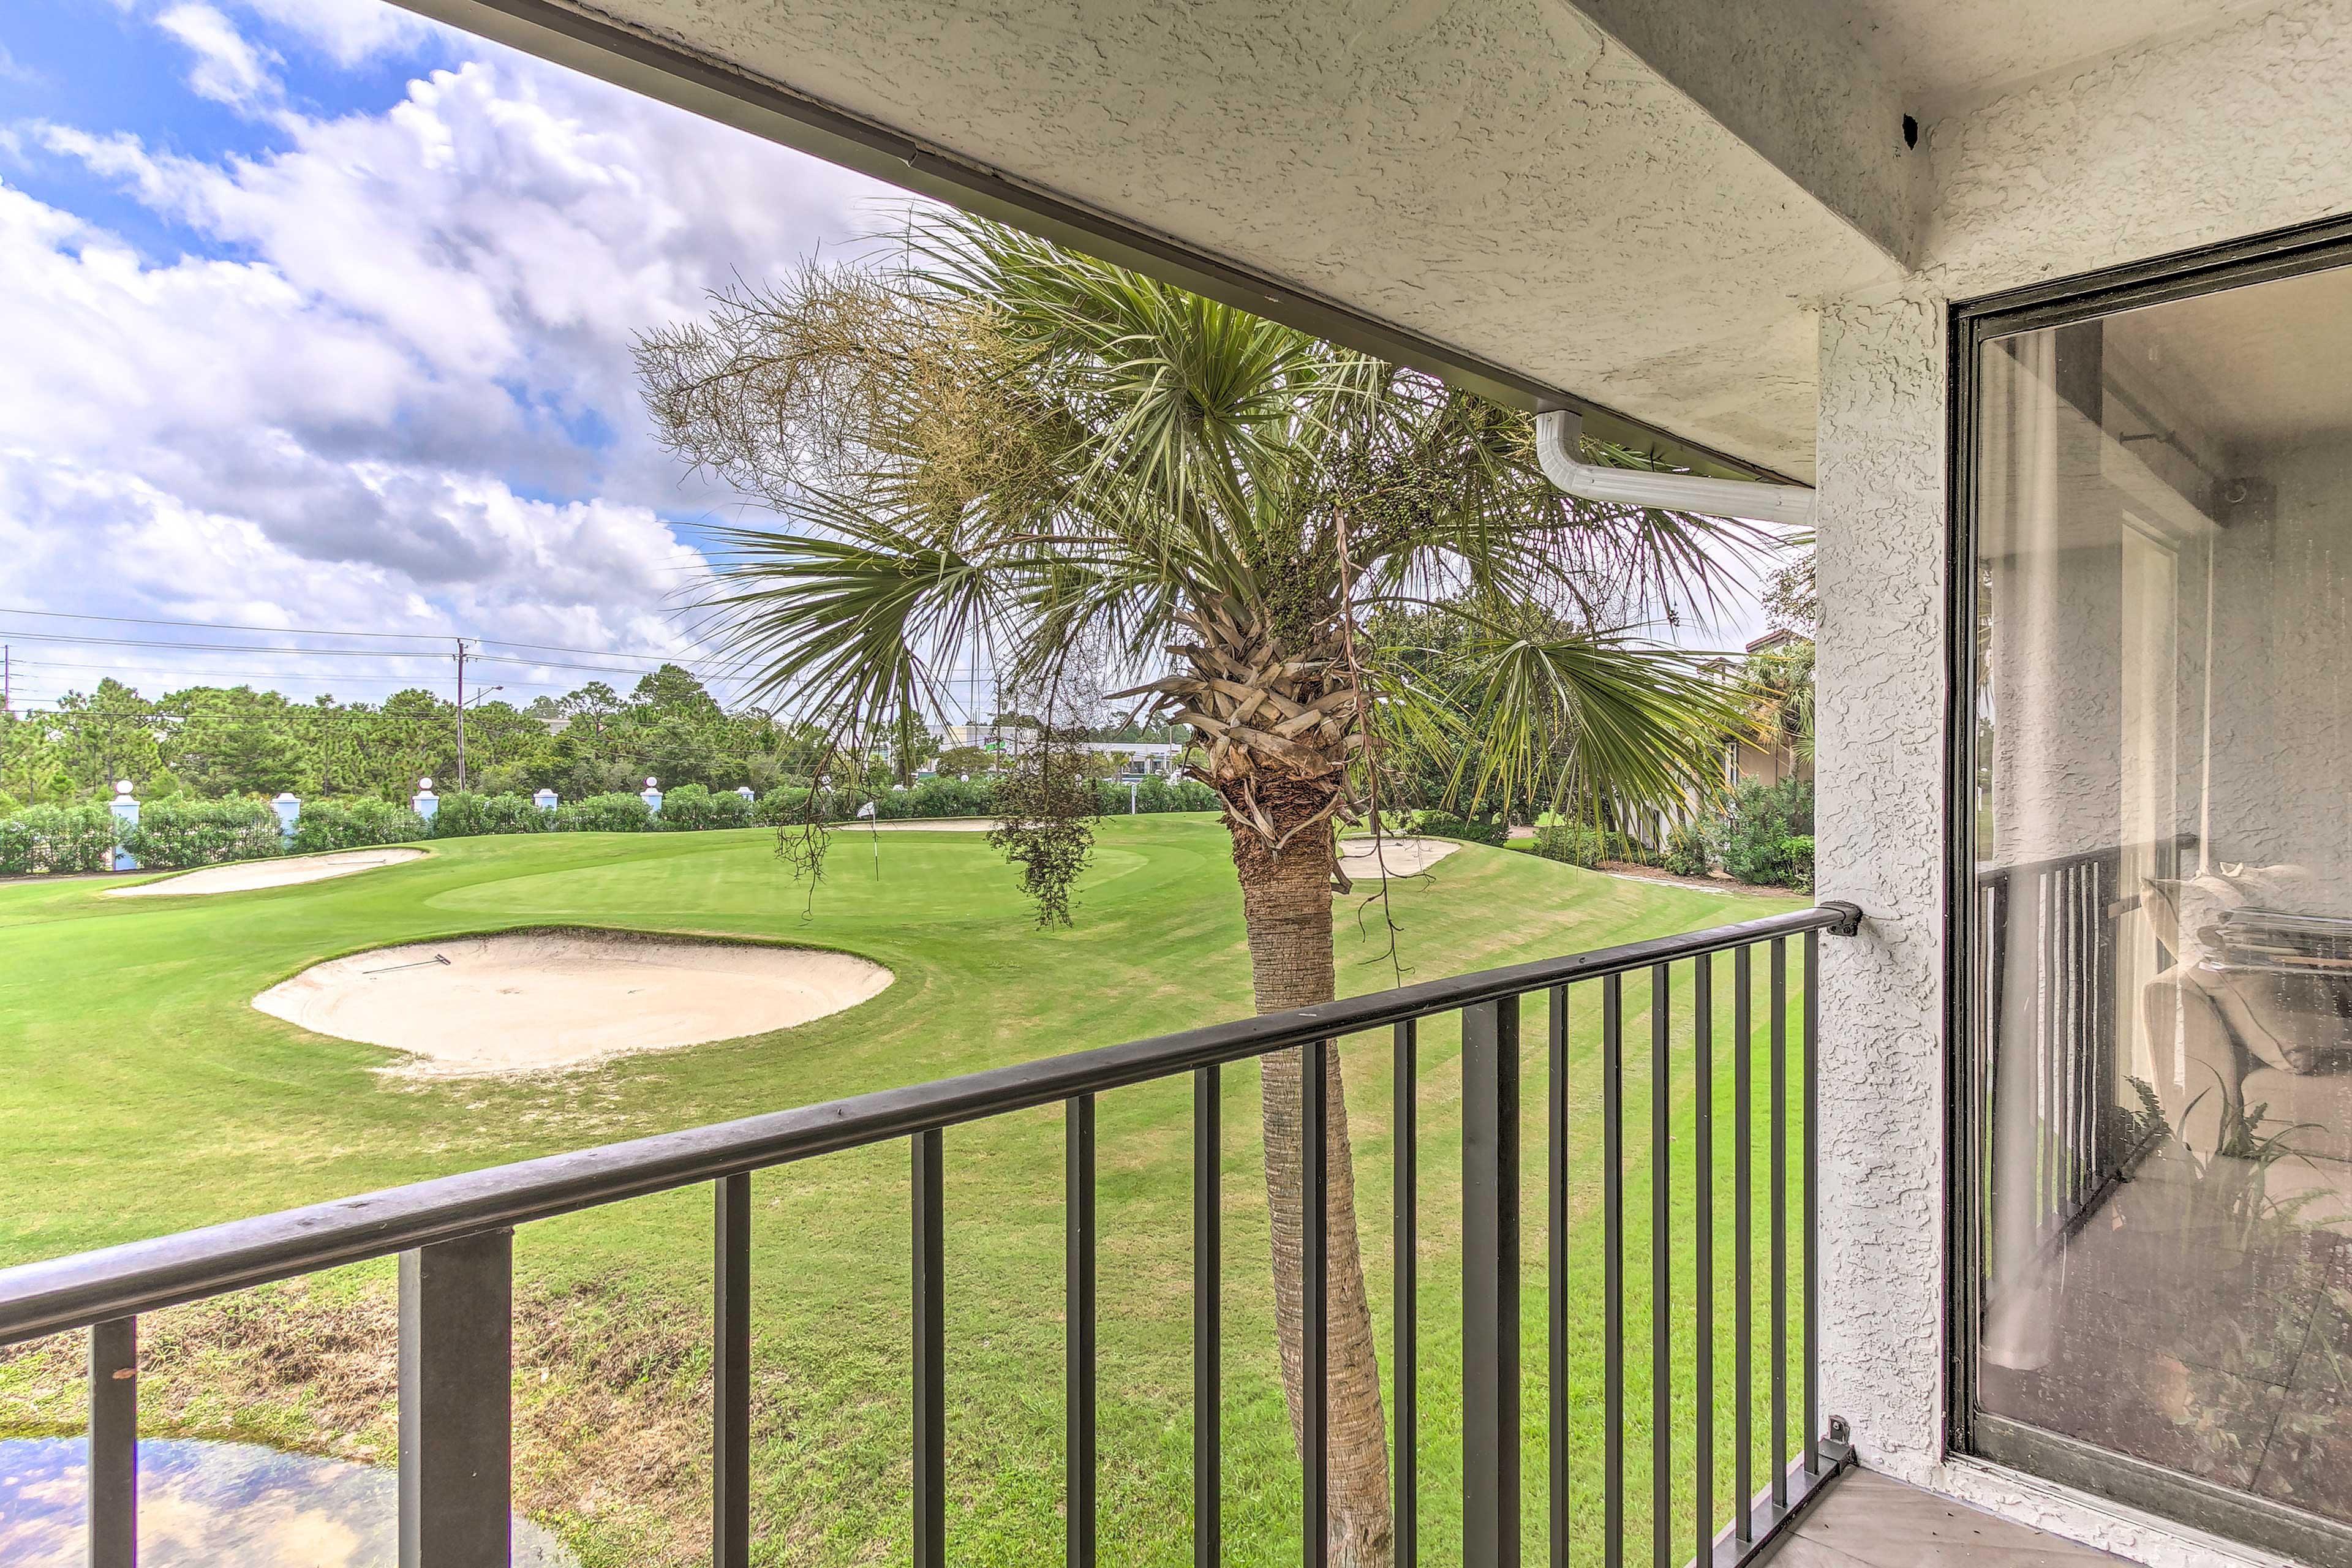 Soak in the golf course views from the condo's balcony.